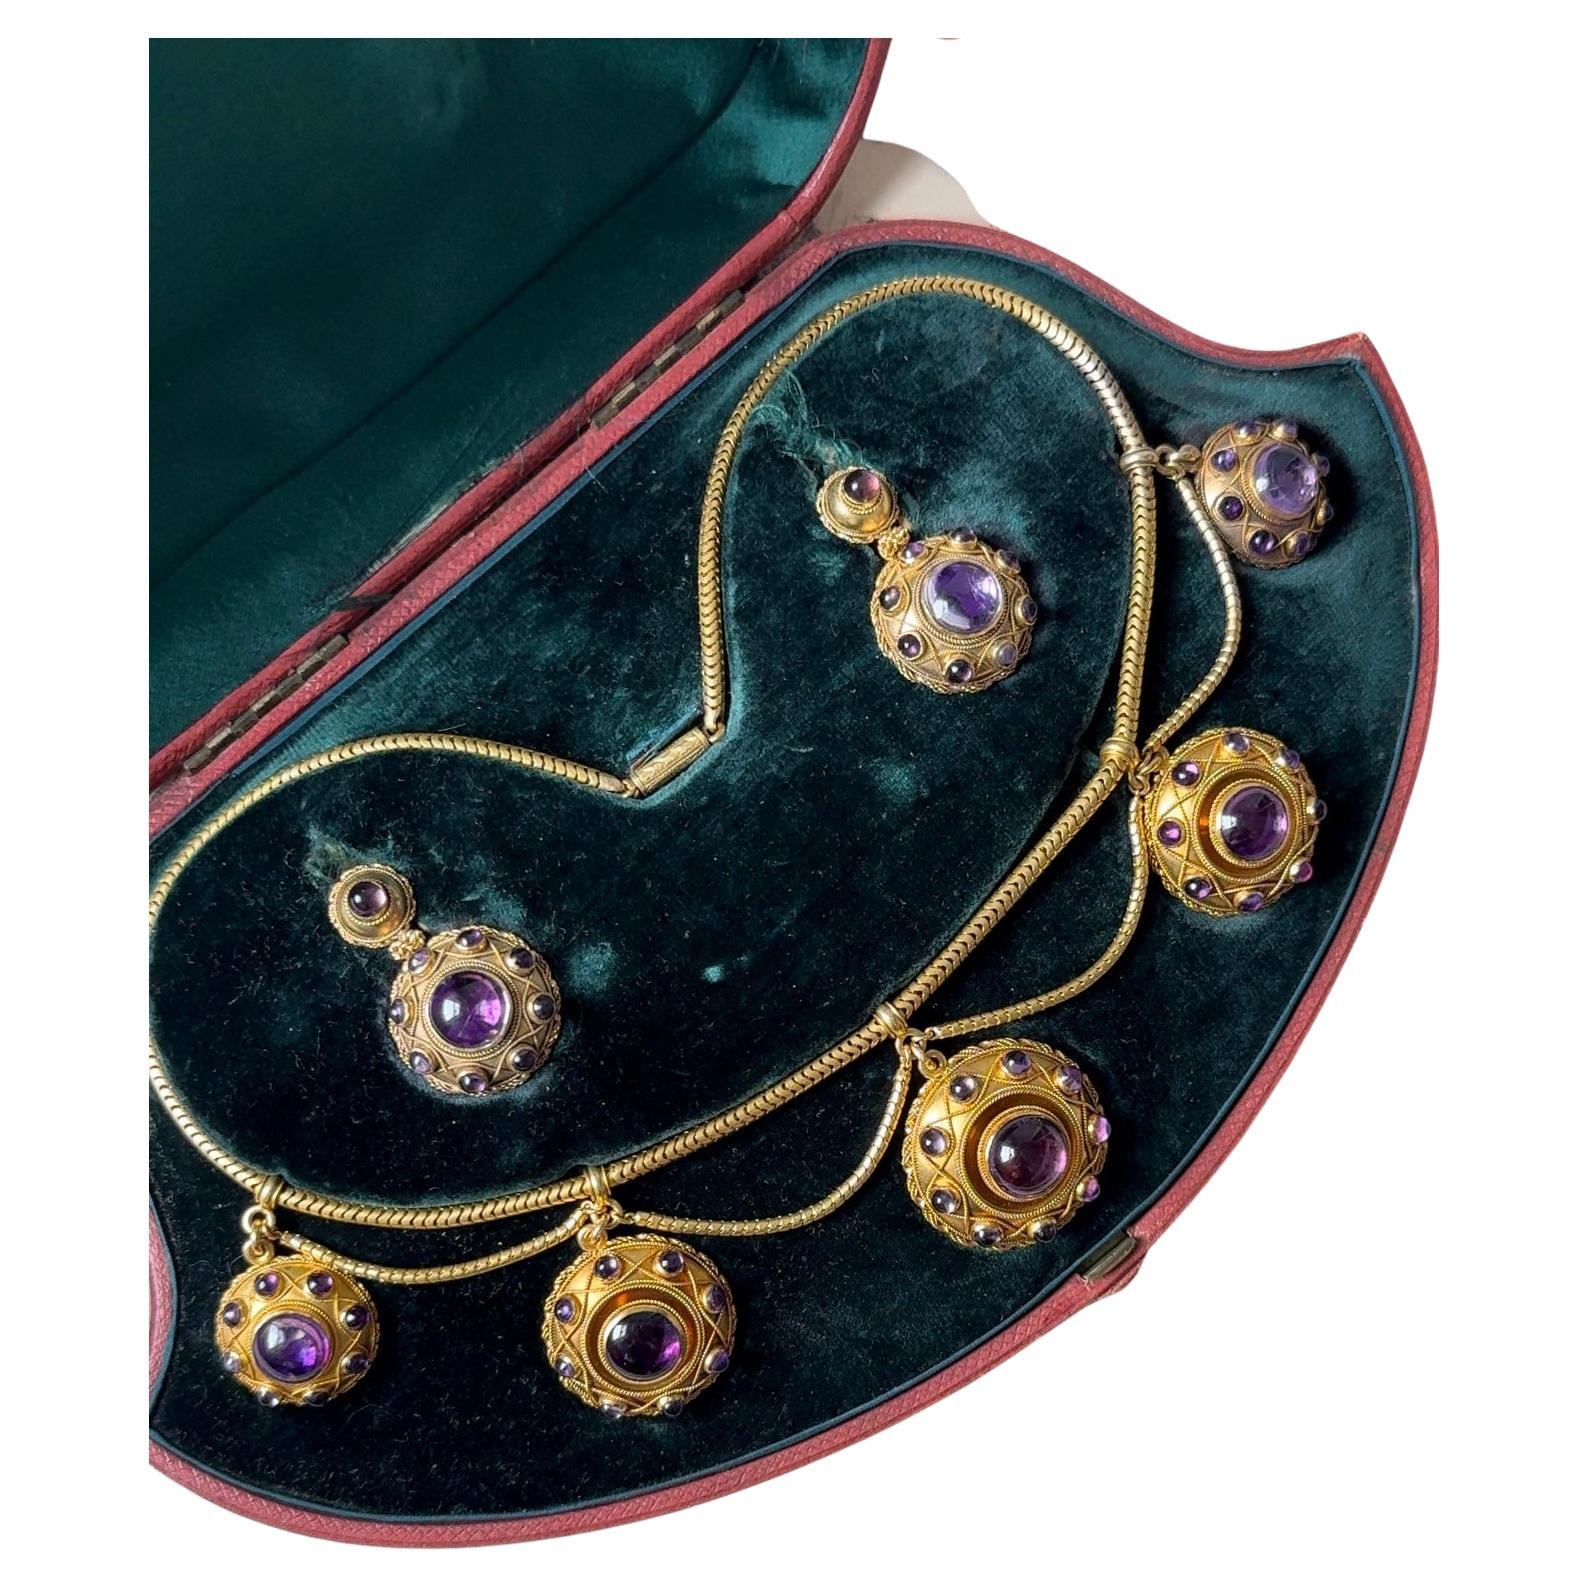 Boxed Antique Etruscan Revival Demi-Parure with Amethyst Collar and Earrings For Sale